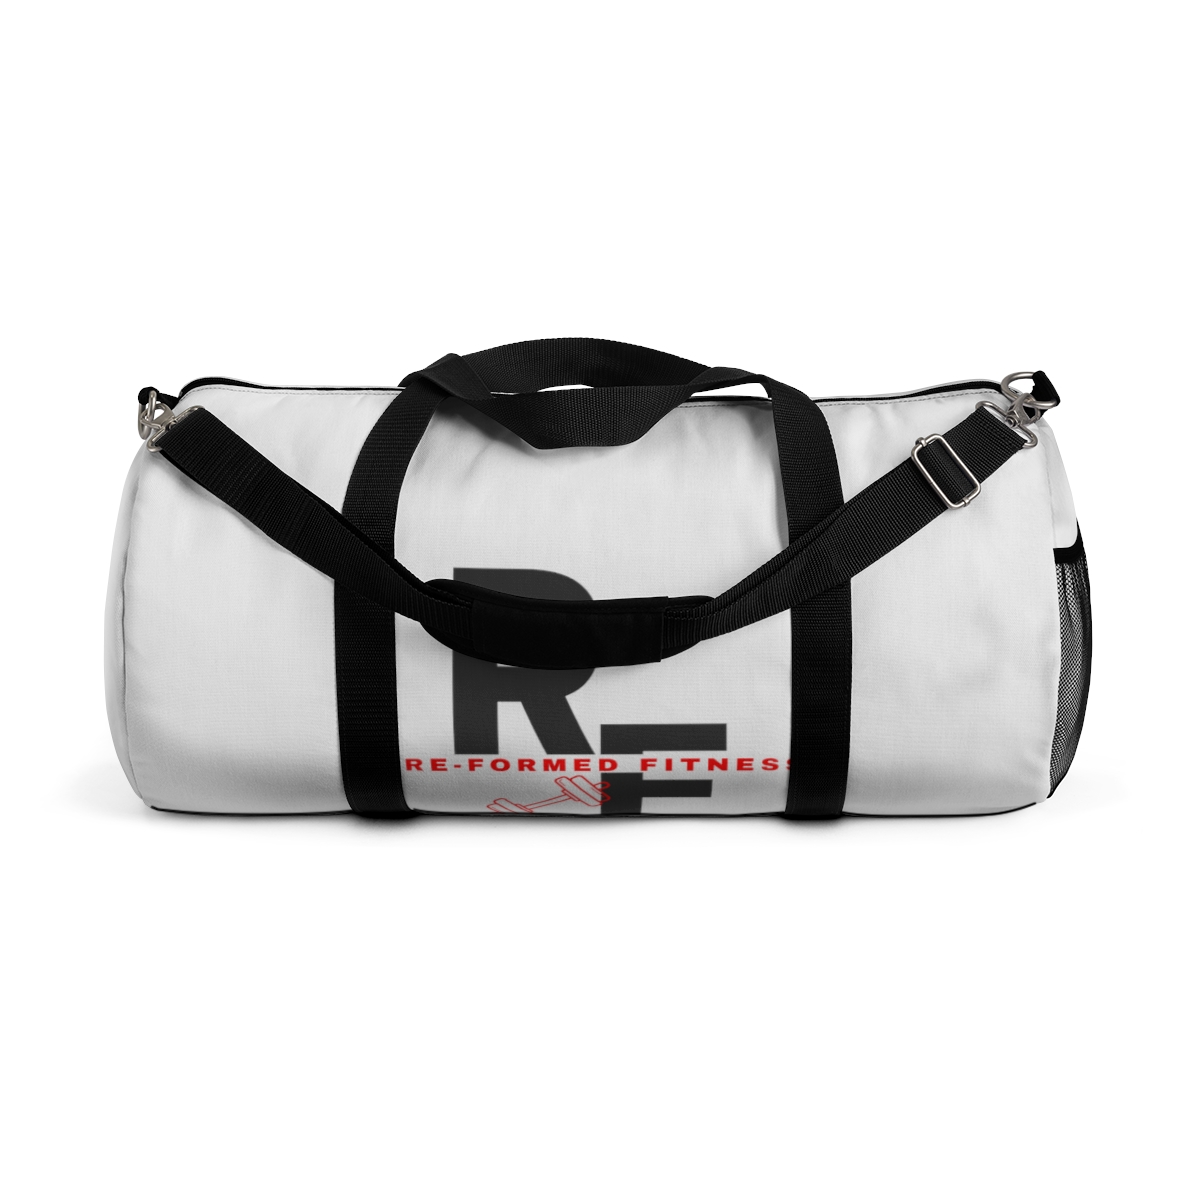 Re-Formed Fitness Duffel Bag product thumbnail image